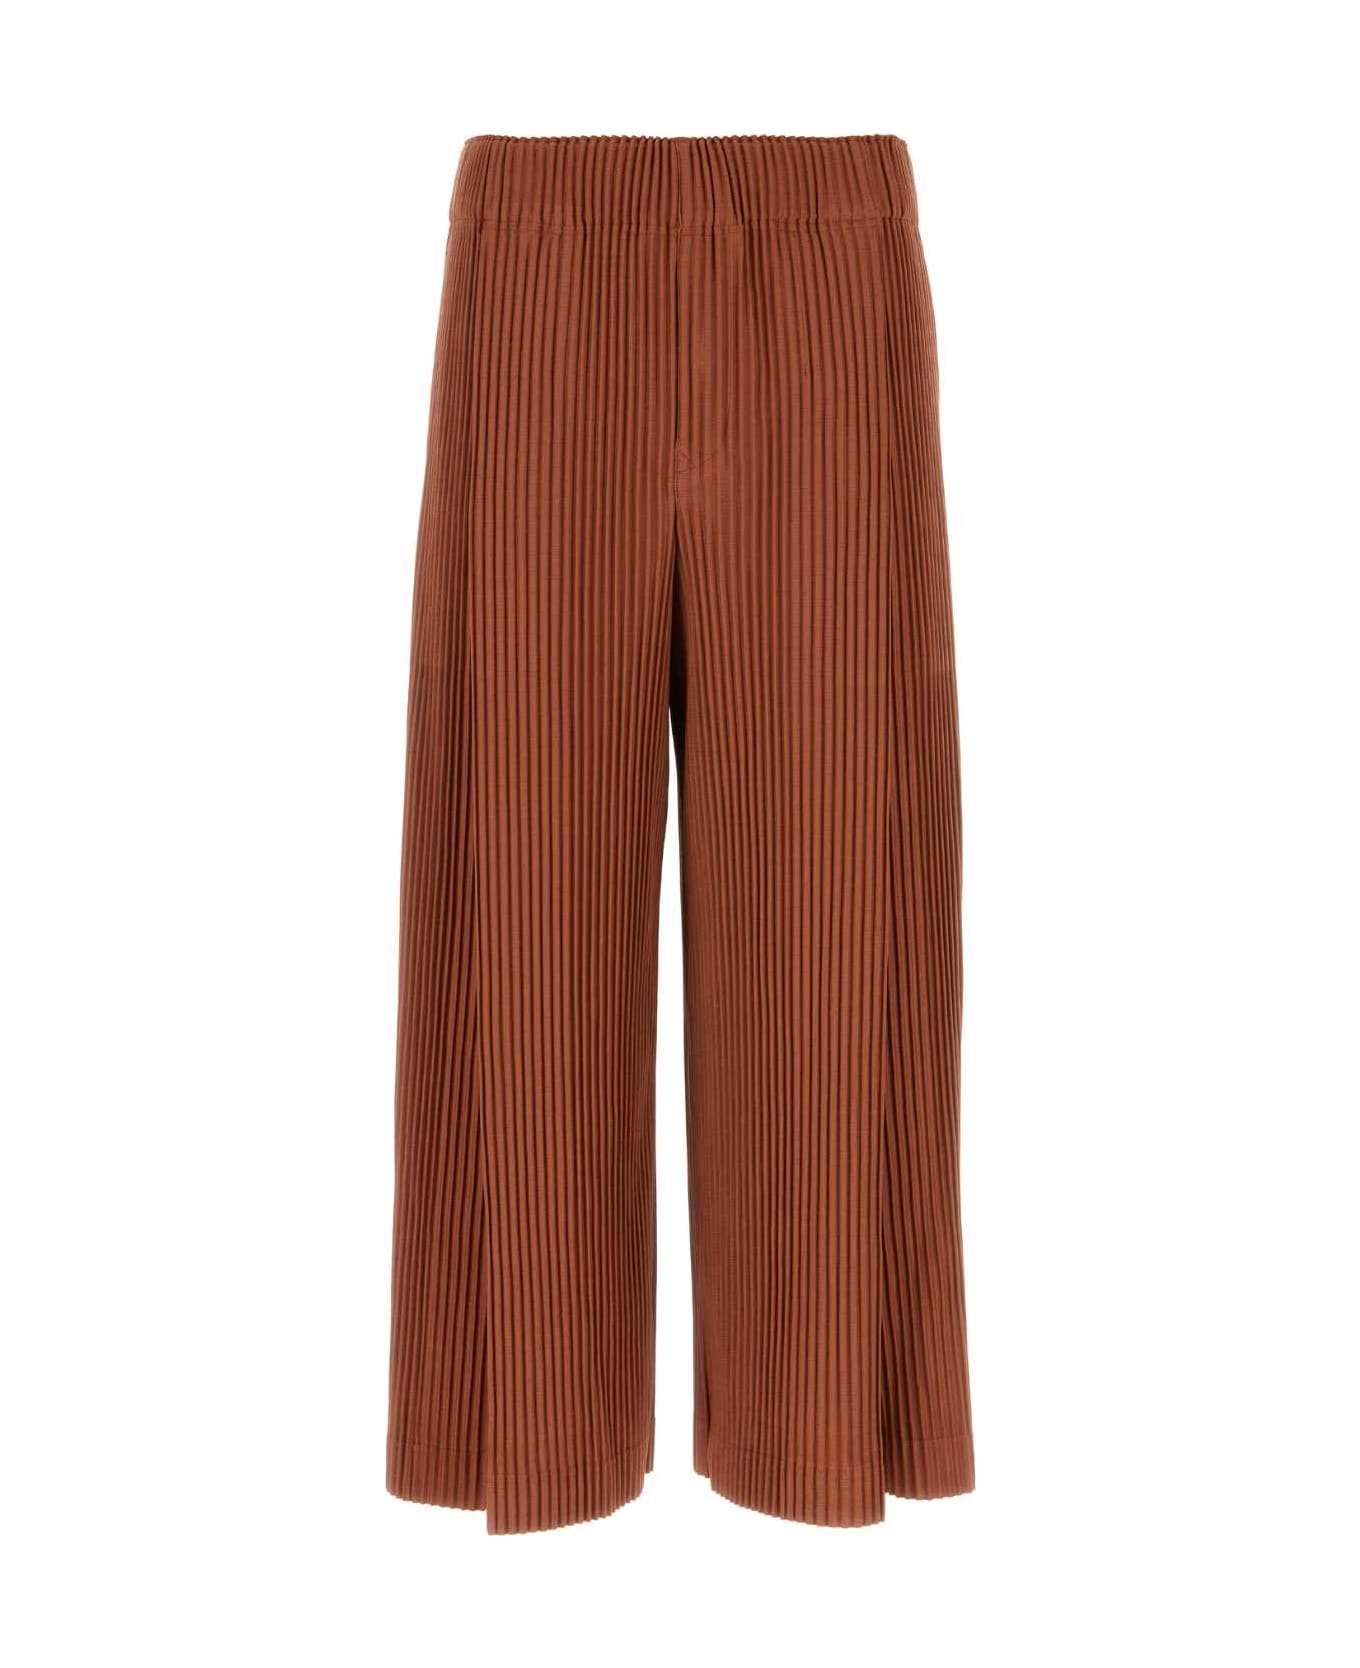 Homme Plissé Issey Miyake Copper Polyester Wide-leg Pant - GINGERBROWN